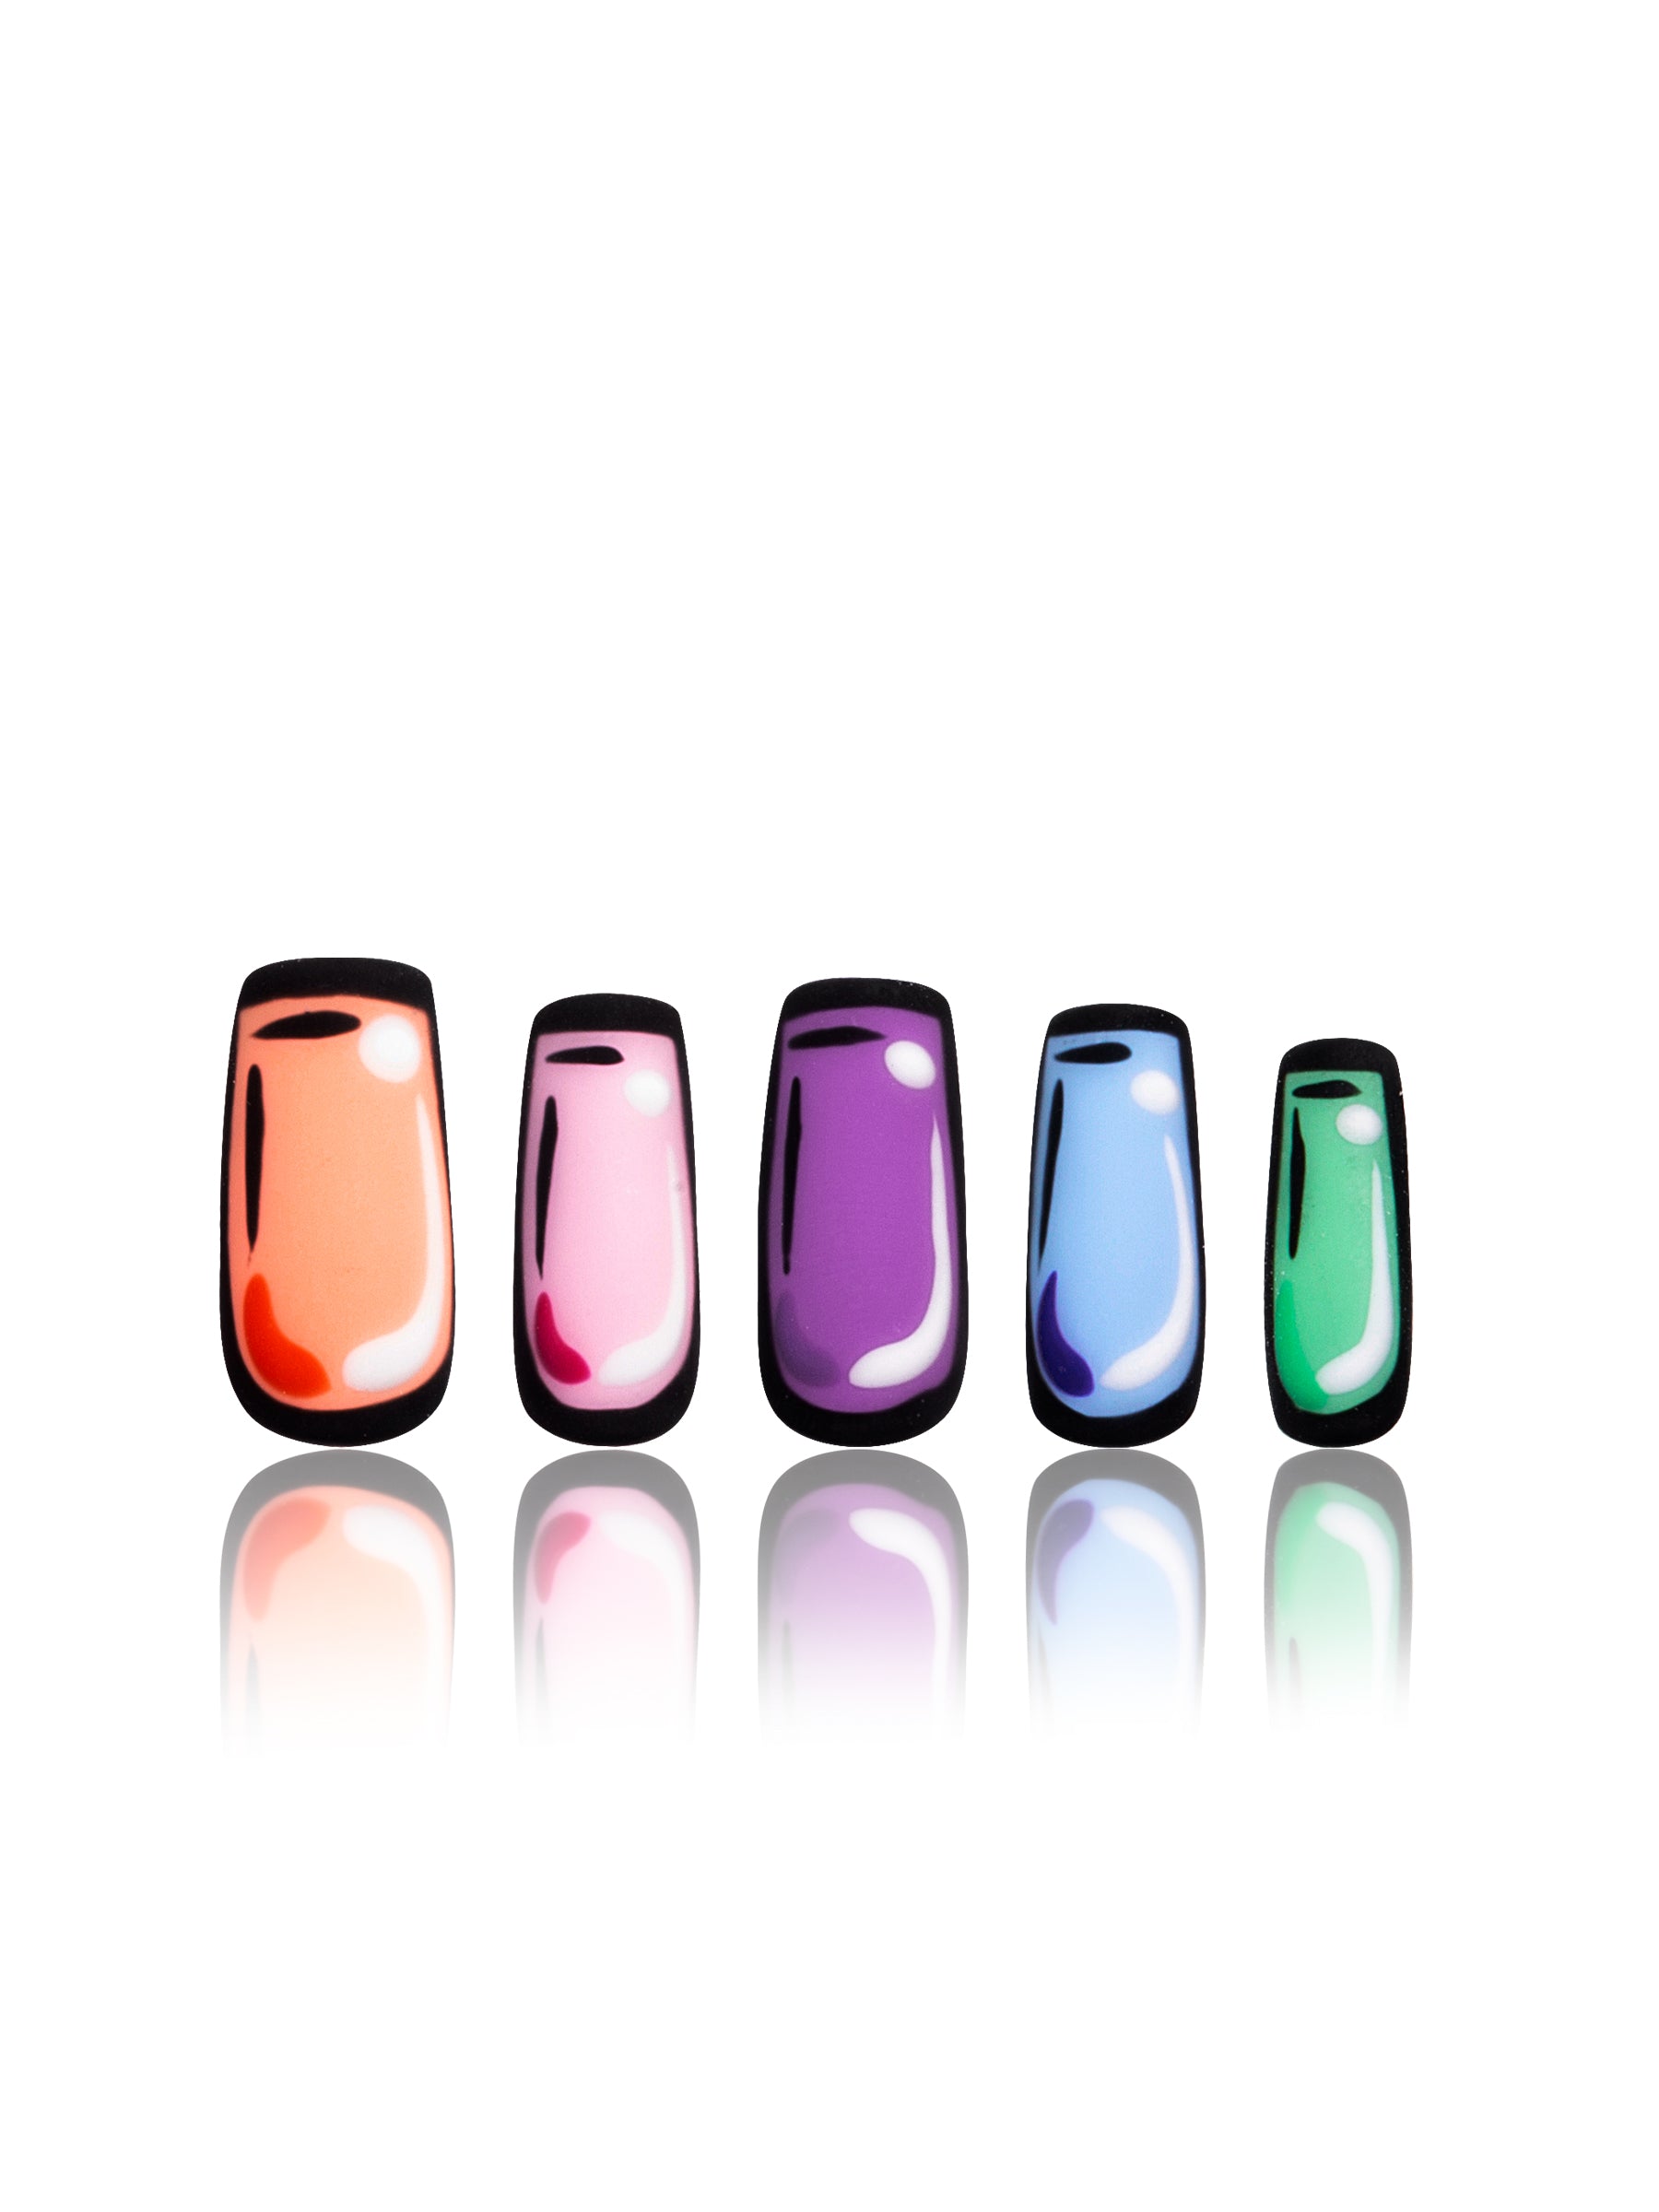 Colorful Pop press-on nails in square shape displayed in a row, featuring vibrant colors of orange, pink, purple, blue, and green.